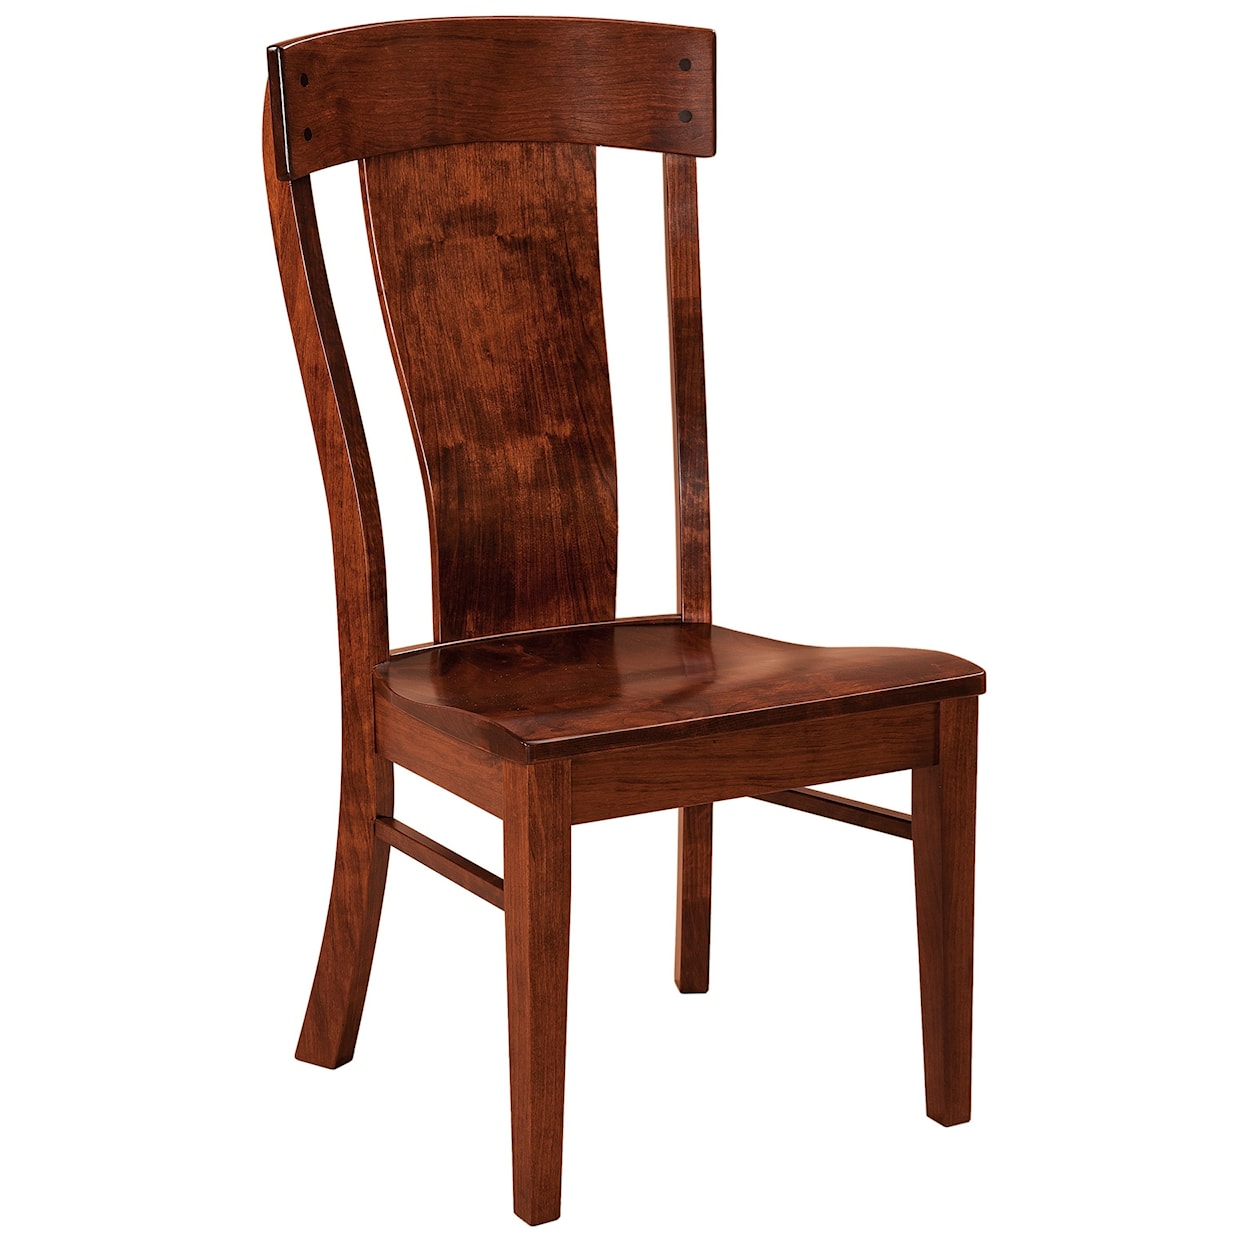 F&N Woodworking Lacombe Side Chair - Fabric Seat